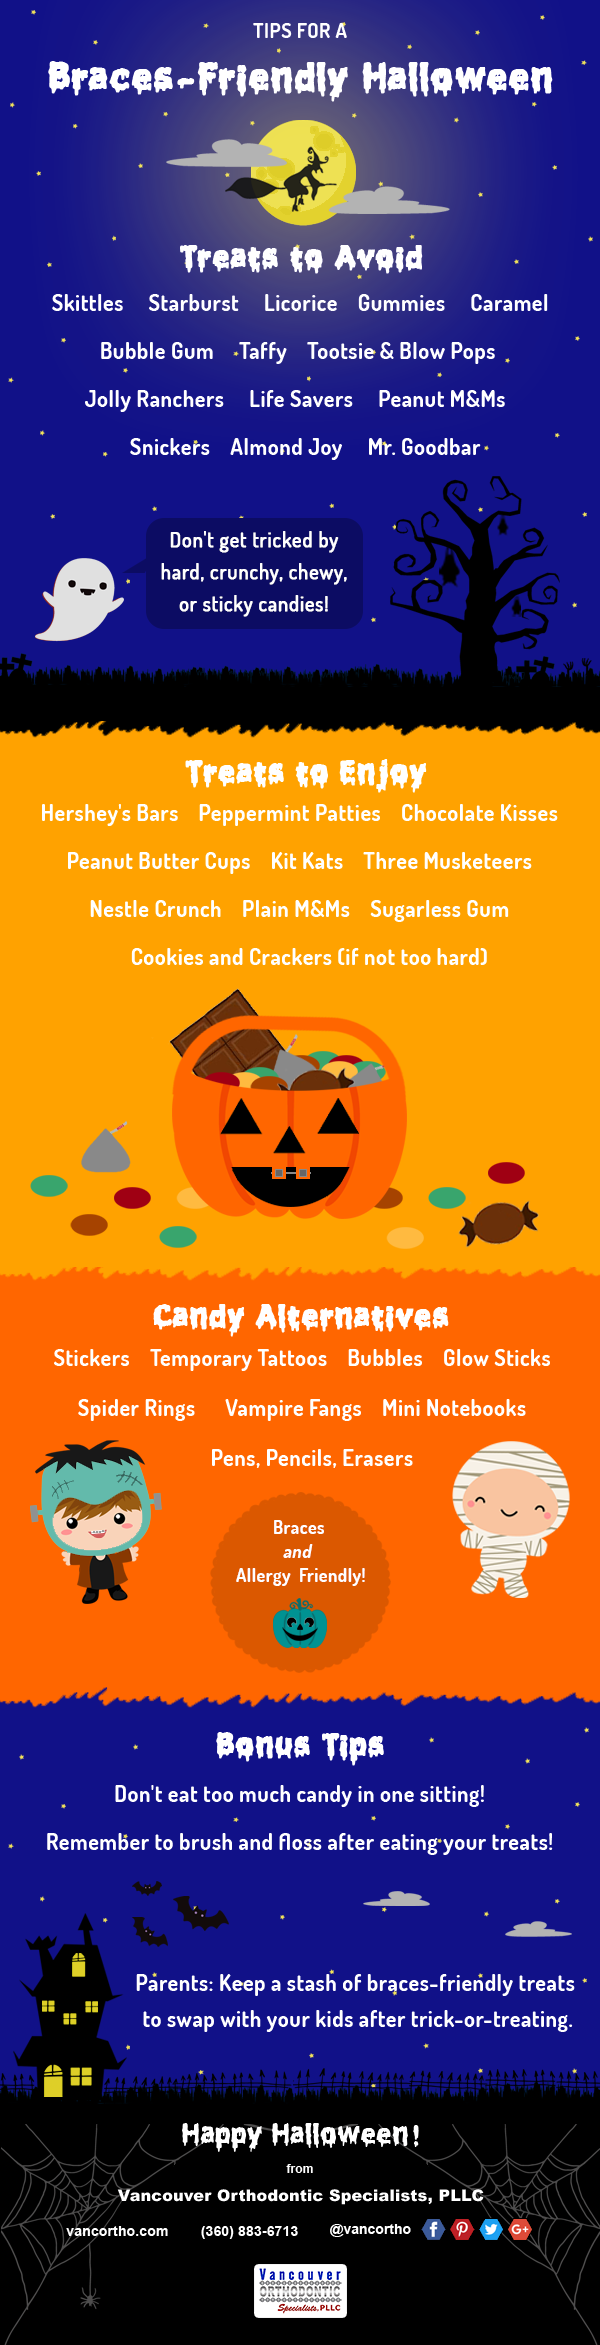 Halloween candy that is safe for braces and what to avoid